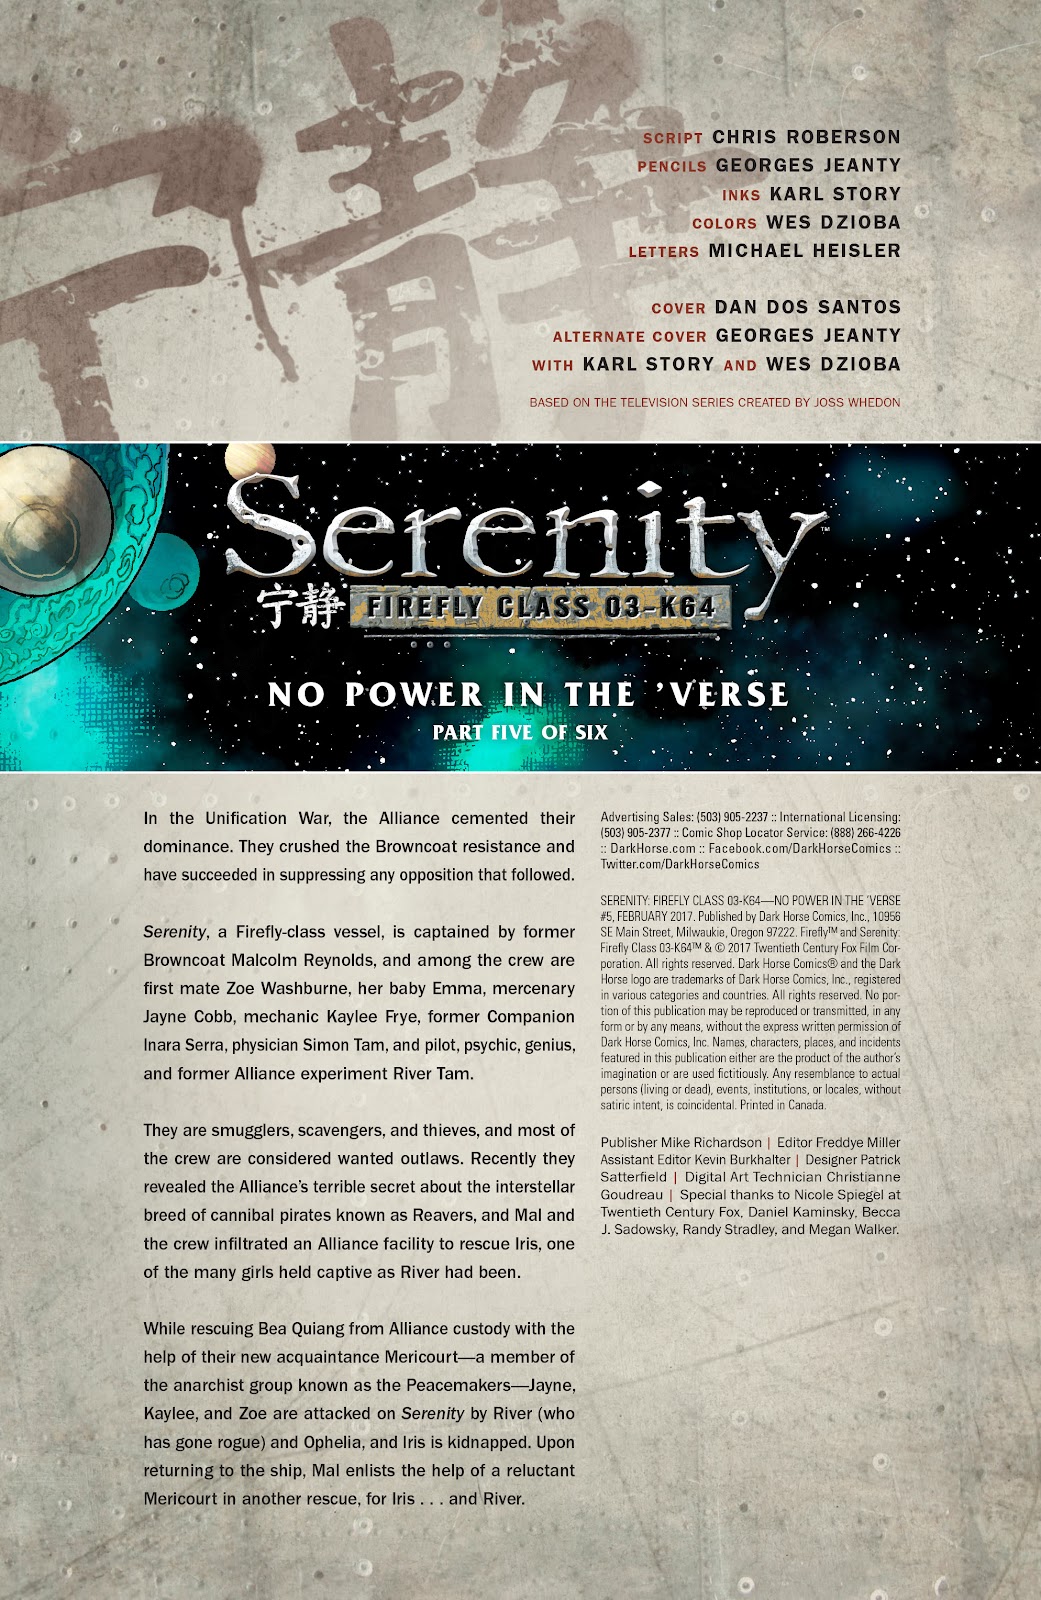 Serenity: Firefly Class 03-K64 – No Power in the 'Verse issue 5 - Page 3